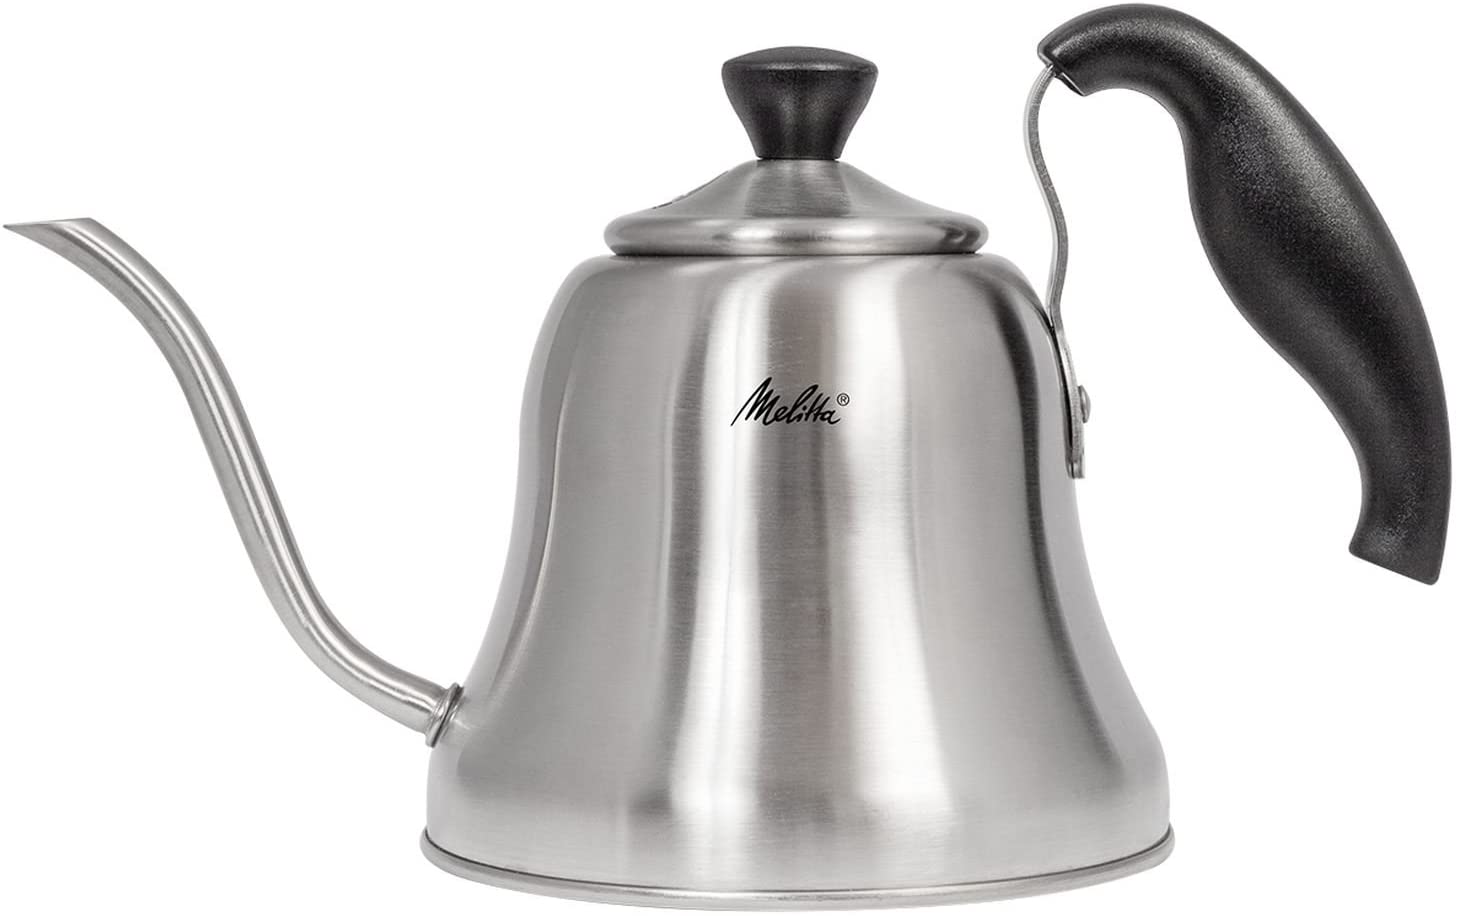 Melitta Hand Brewing Kettle with Gooseneck Spout, Stainless Steel, 0.7 Litre, 217649